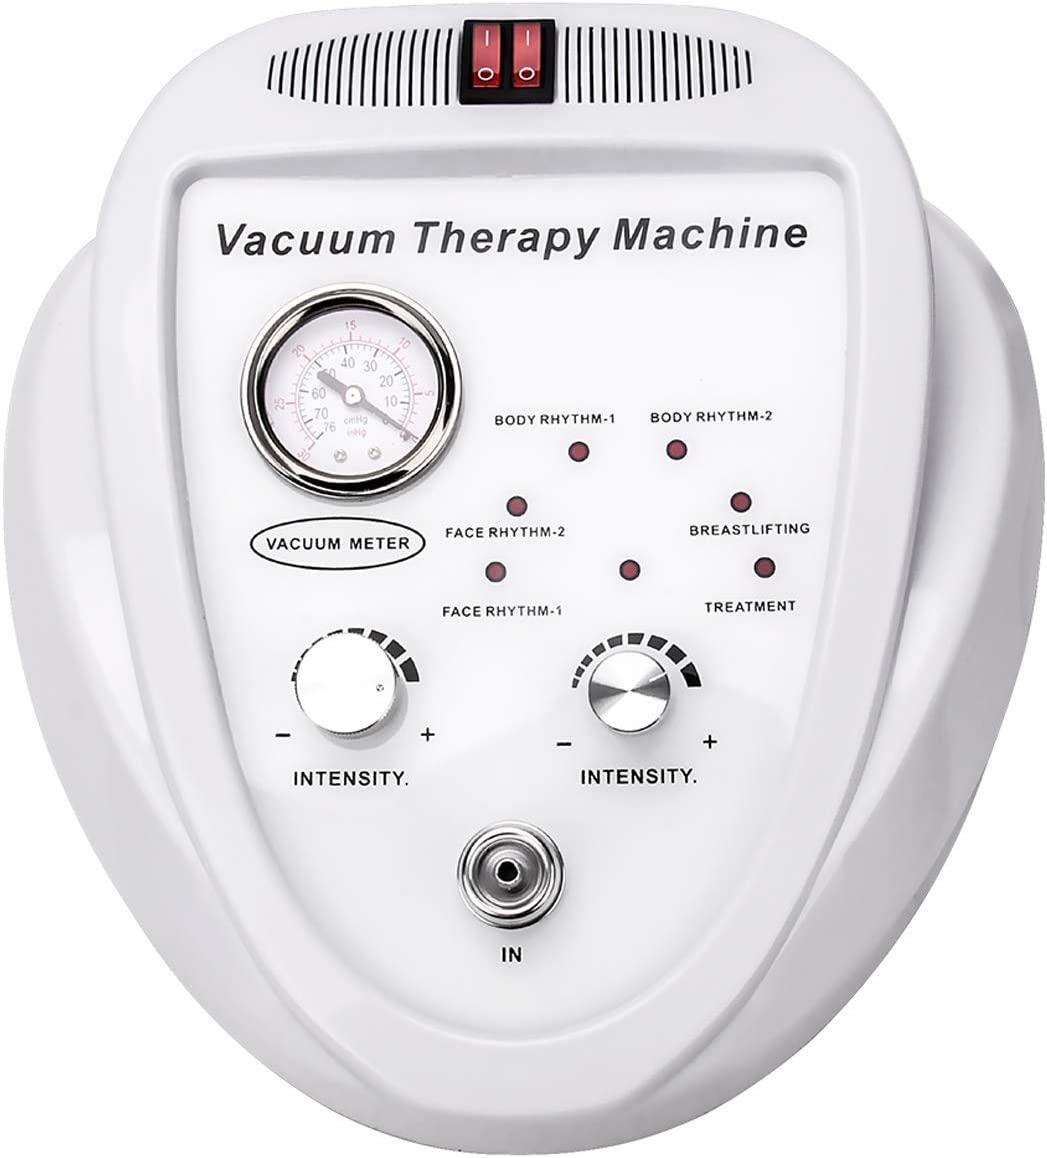 Meifuly Vacuum Therapy Machine, 3 in 1 Vacuum Cupping Sets, Skin Care and  Airbrush Machine, with 180…See more Meifuly Vacuum Therapy Machine, 3 in 1